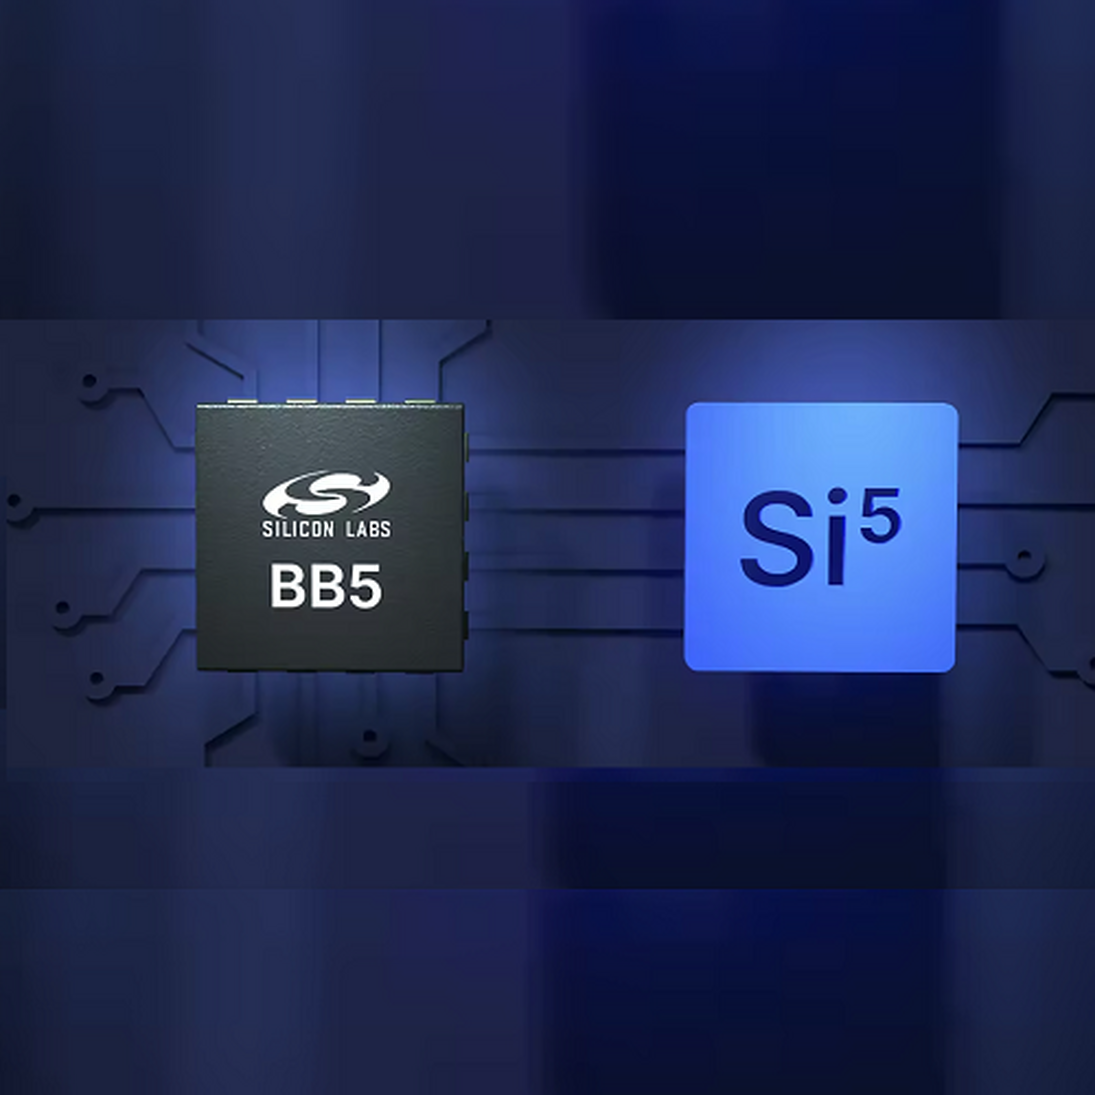 Silicon labs BB5